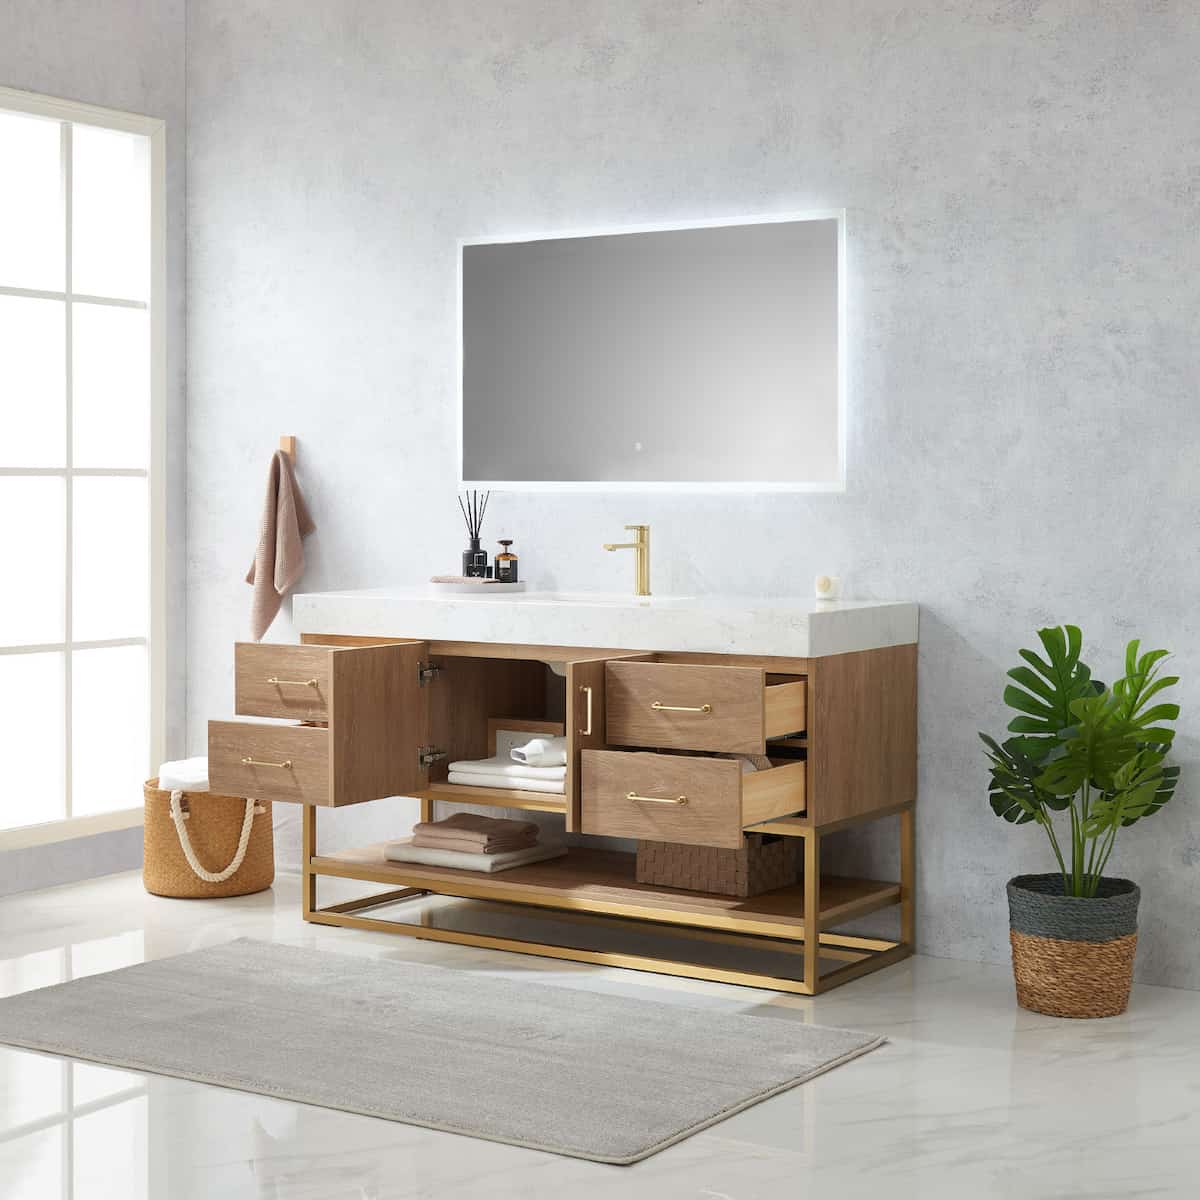 Vinnova Alistair 60 Inch Freestanding Single Vanity in North American Oak and Brushed Gold Frame with White Grain Stone Countertop With Mirror Inside 789060S-NO-GW